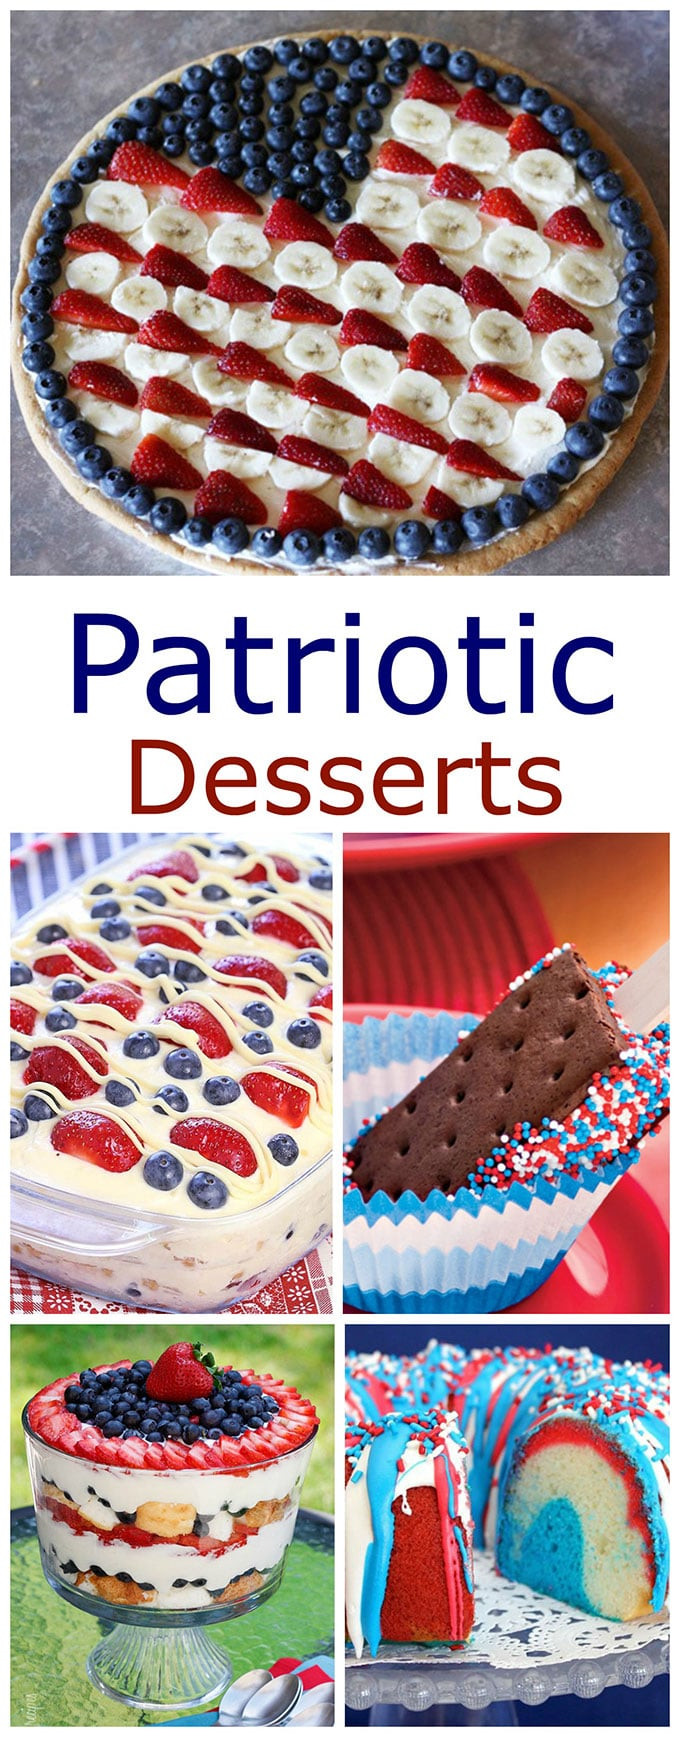 Easy July 4 Desserts
 Last Minute 4th of July Dessert Ideas House of Hawthornes